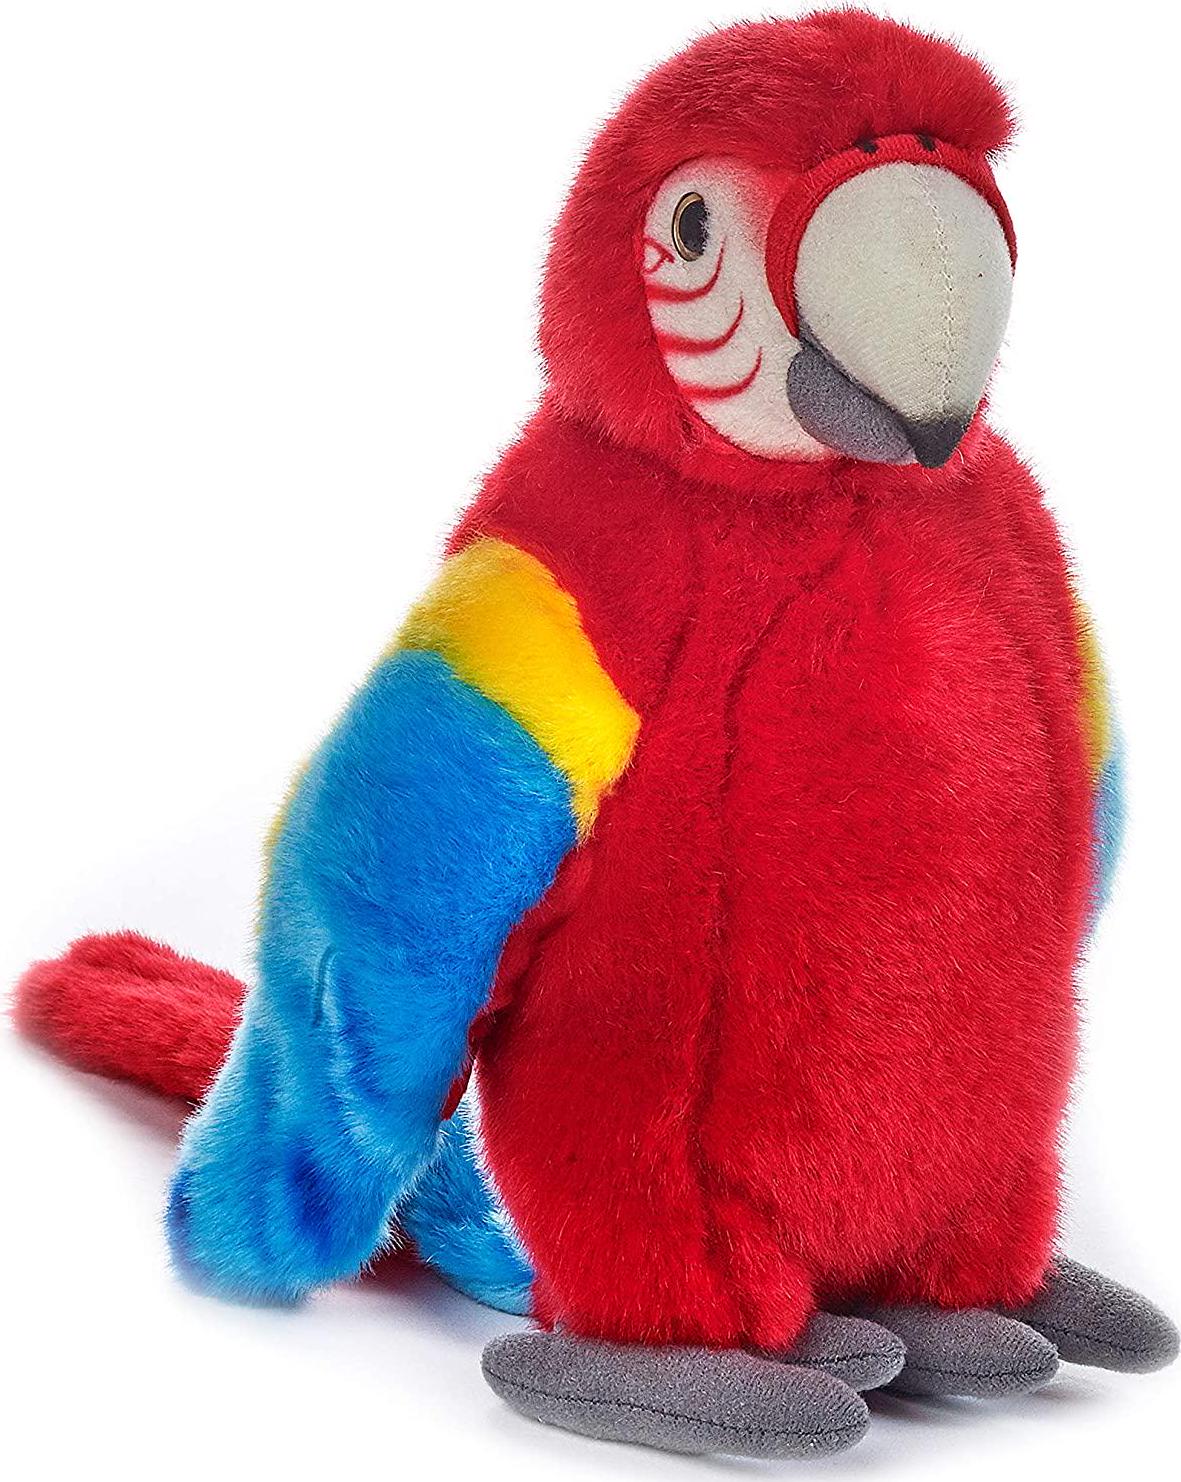 Lelly, Lelly - National Geographic Plush, Red Tropical Parrot